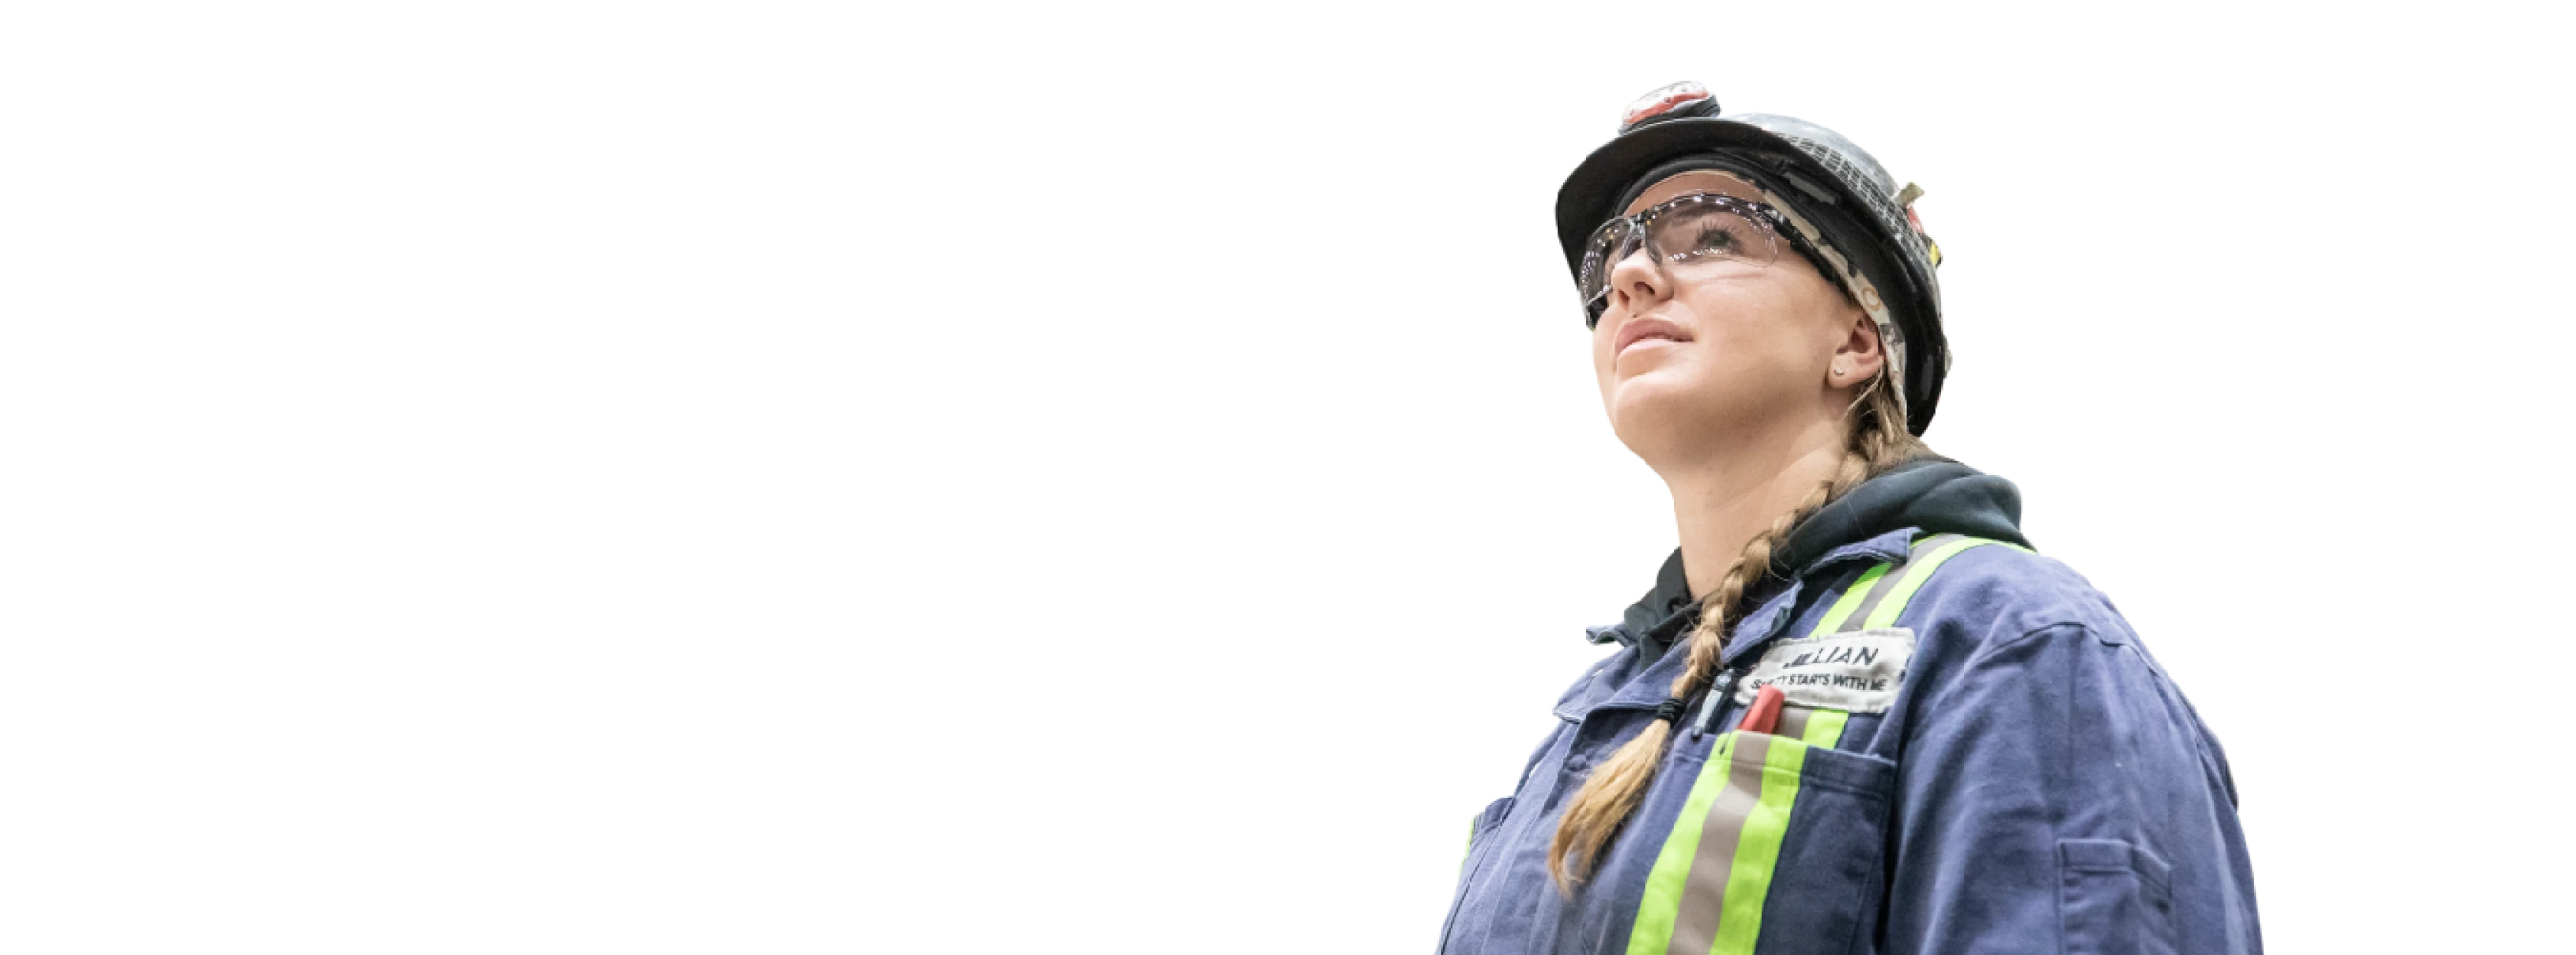 Worker wearing safety gear and a reflective vest, looking up.